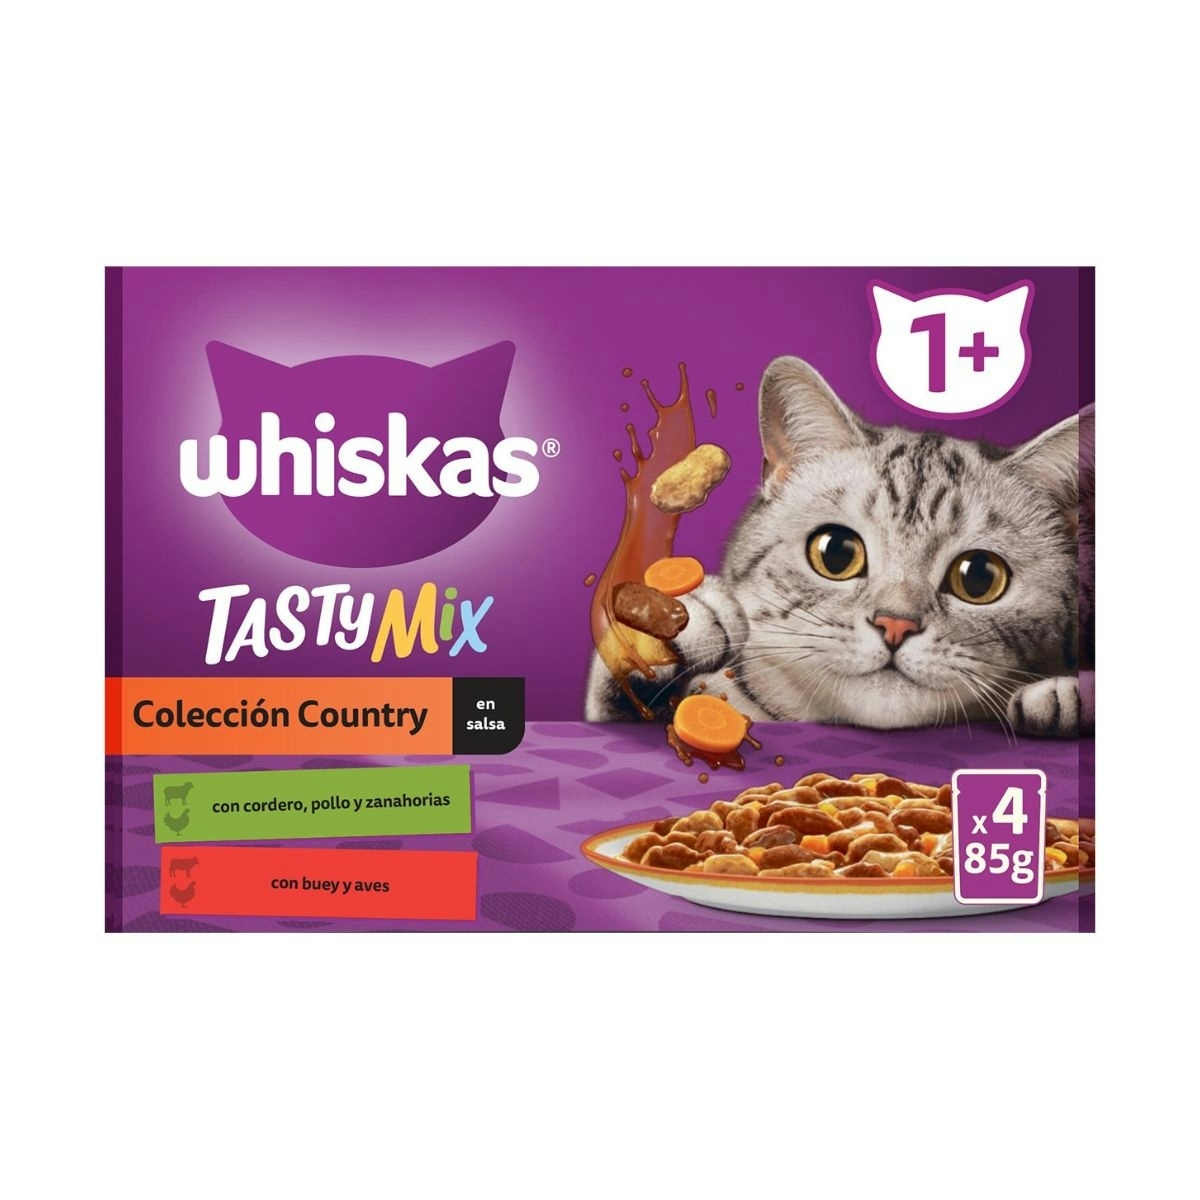 Tasty Mix Country Whiskas 4X85G